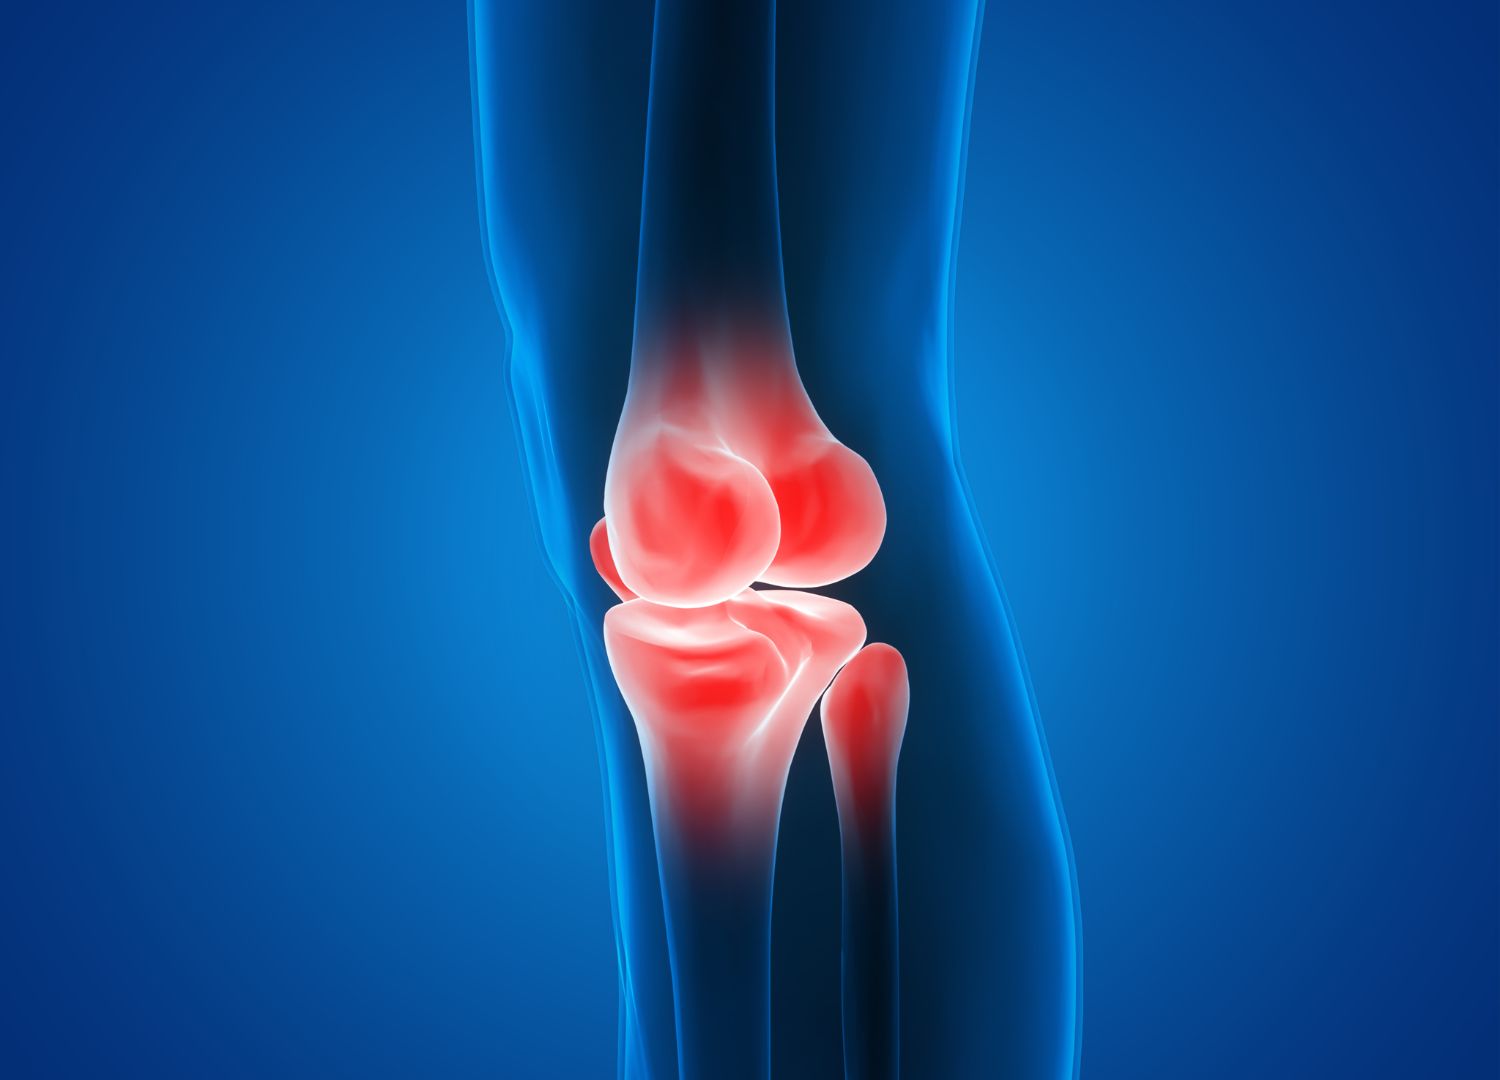 Osteomyelitis (Bone Infection): What you should know